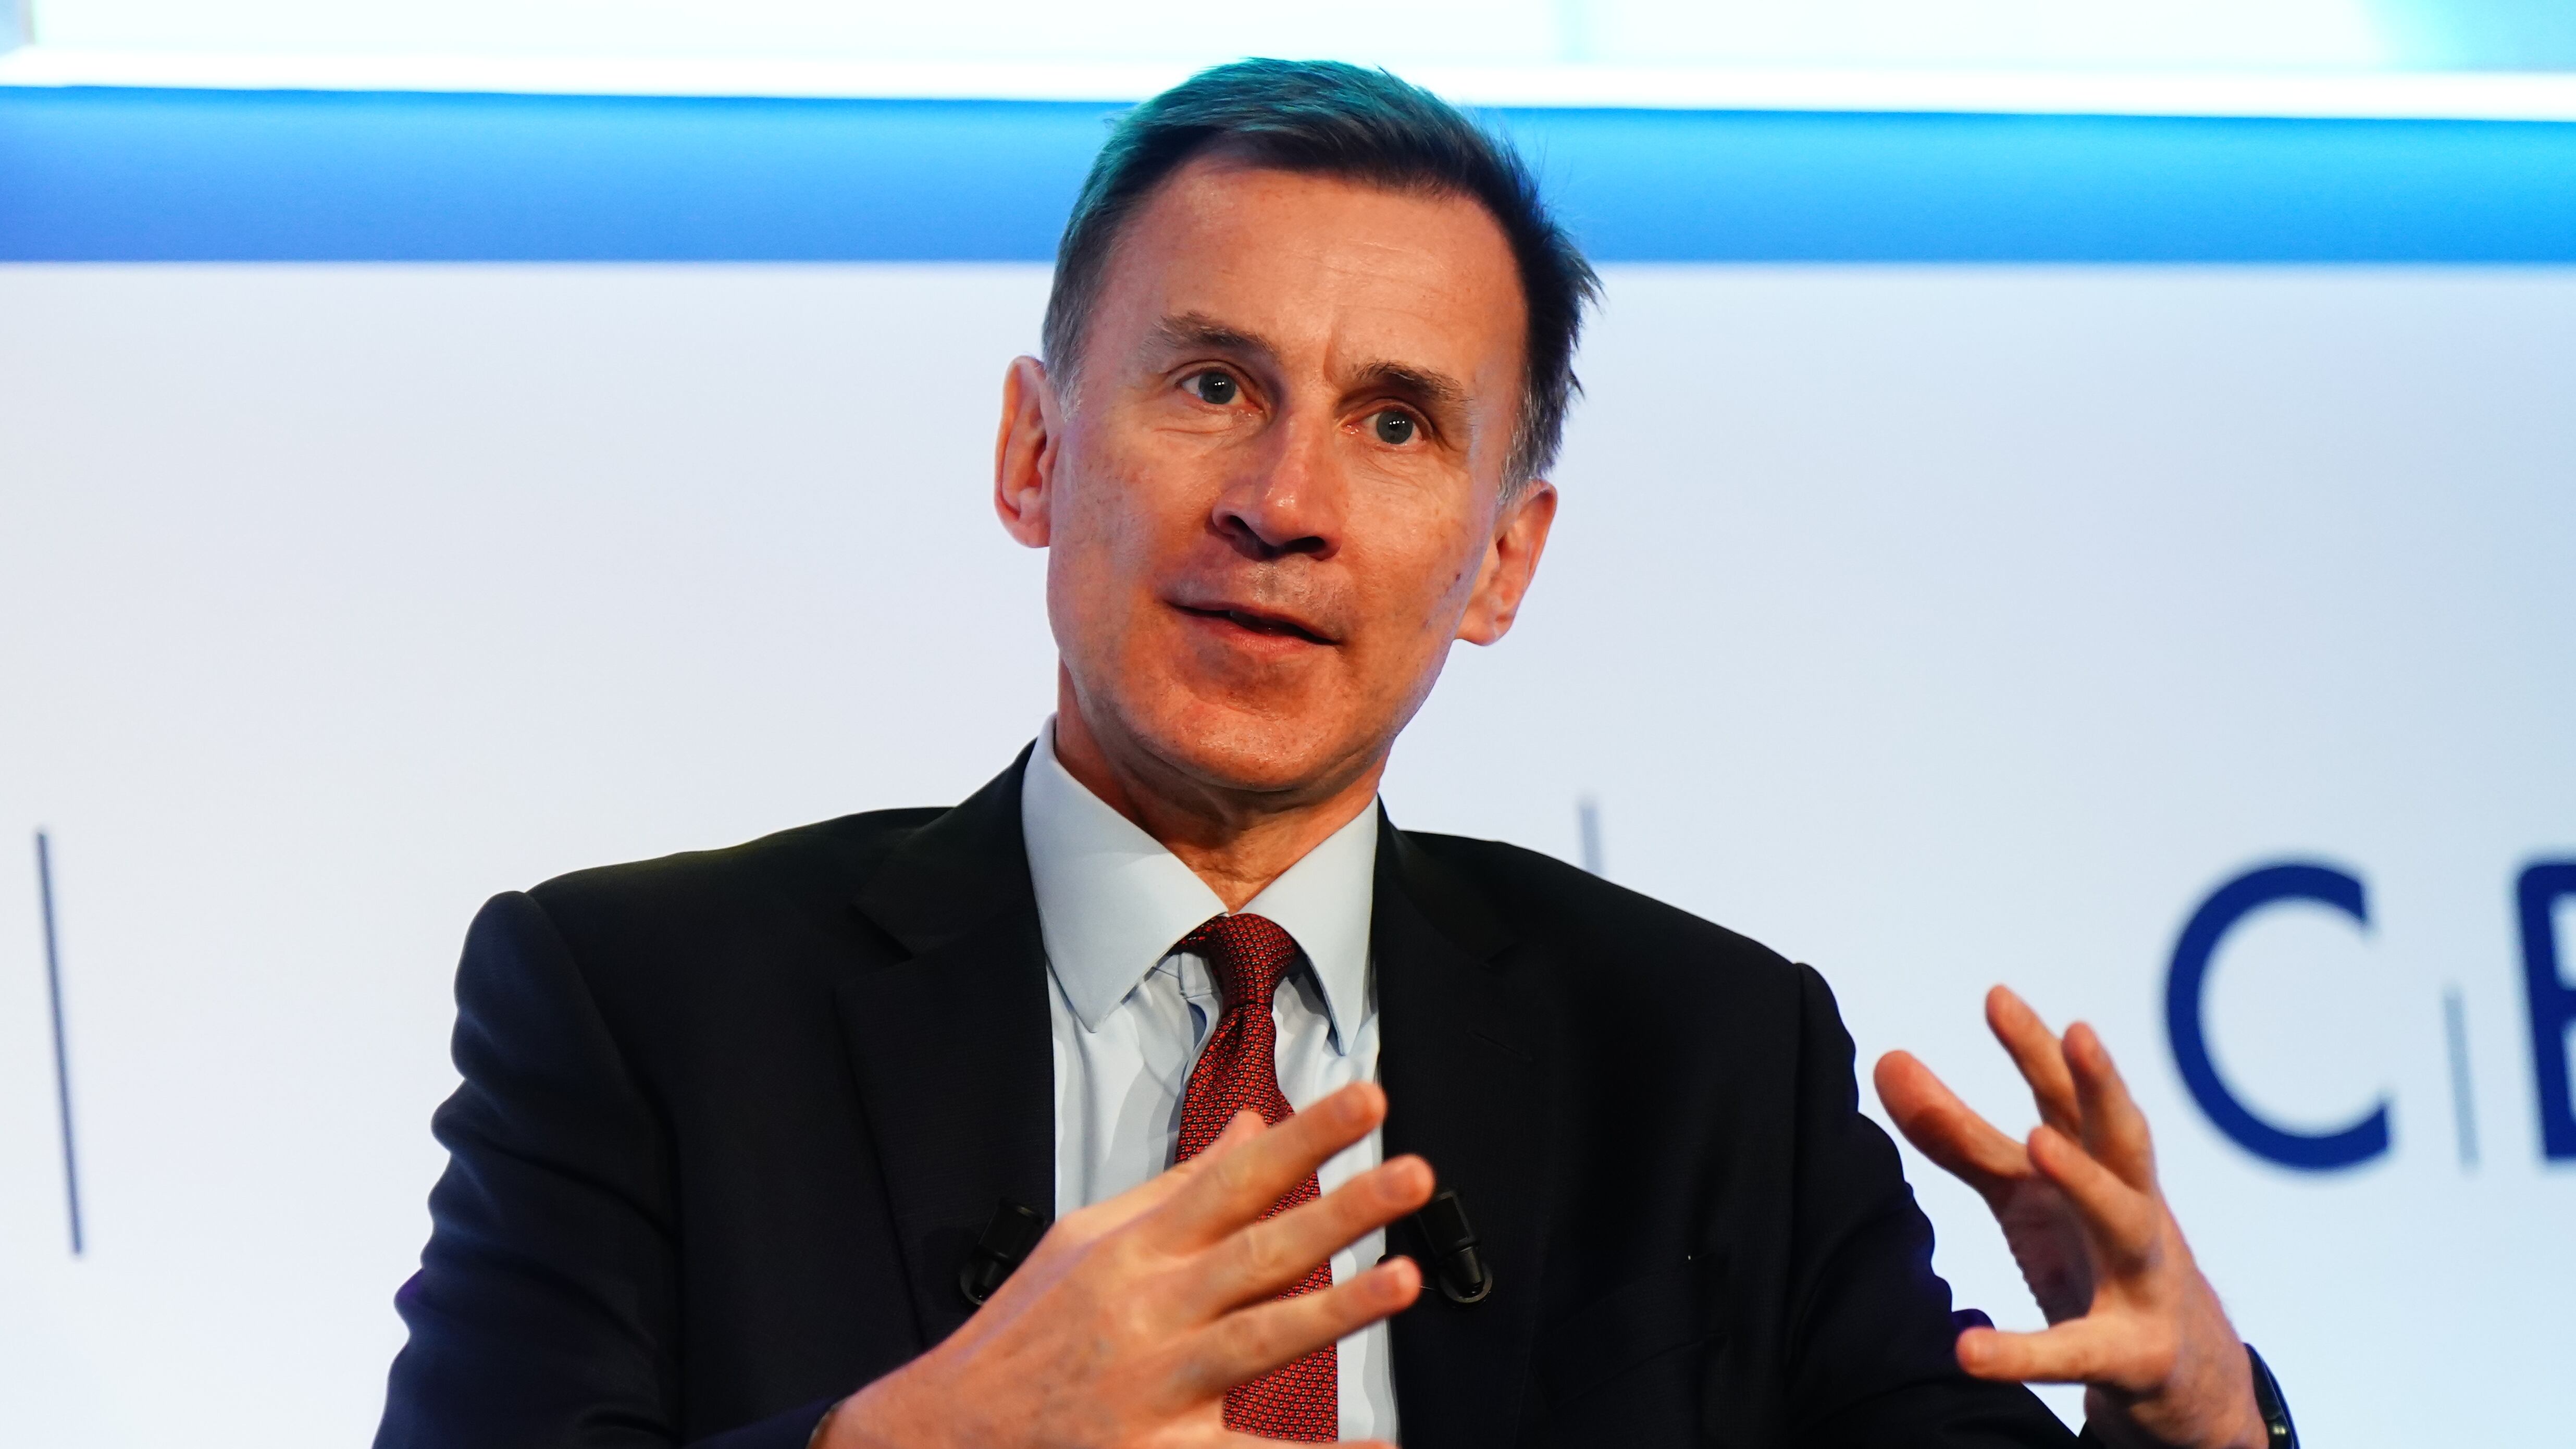 Chancellor Jeremy Hunt will tell Davos that the UK is ‘on the up’